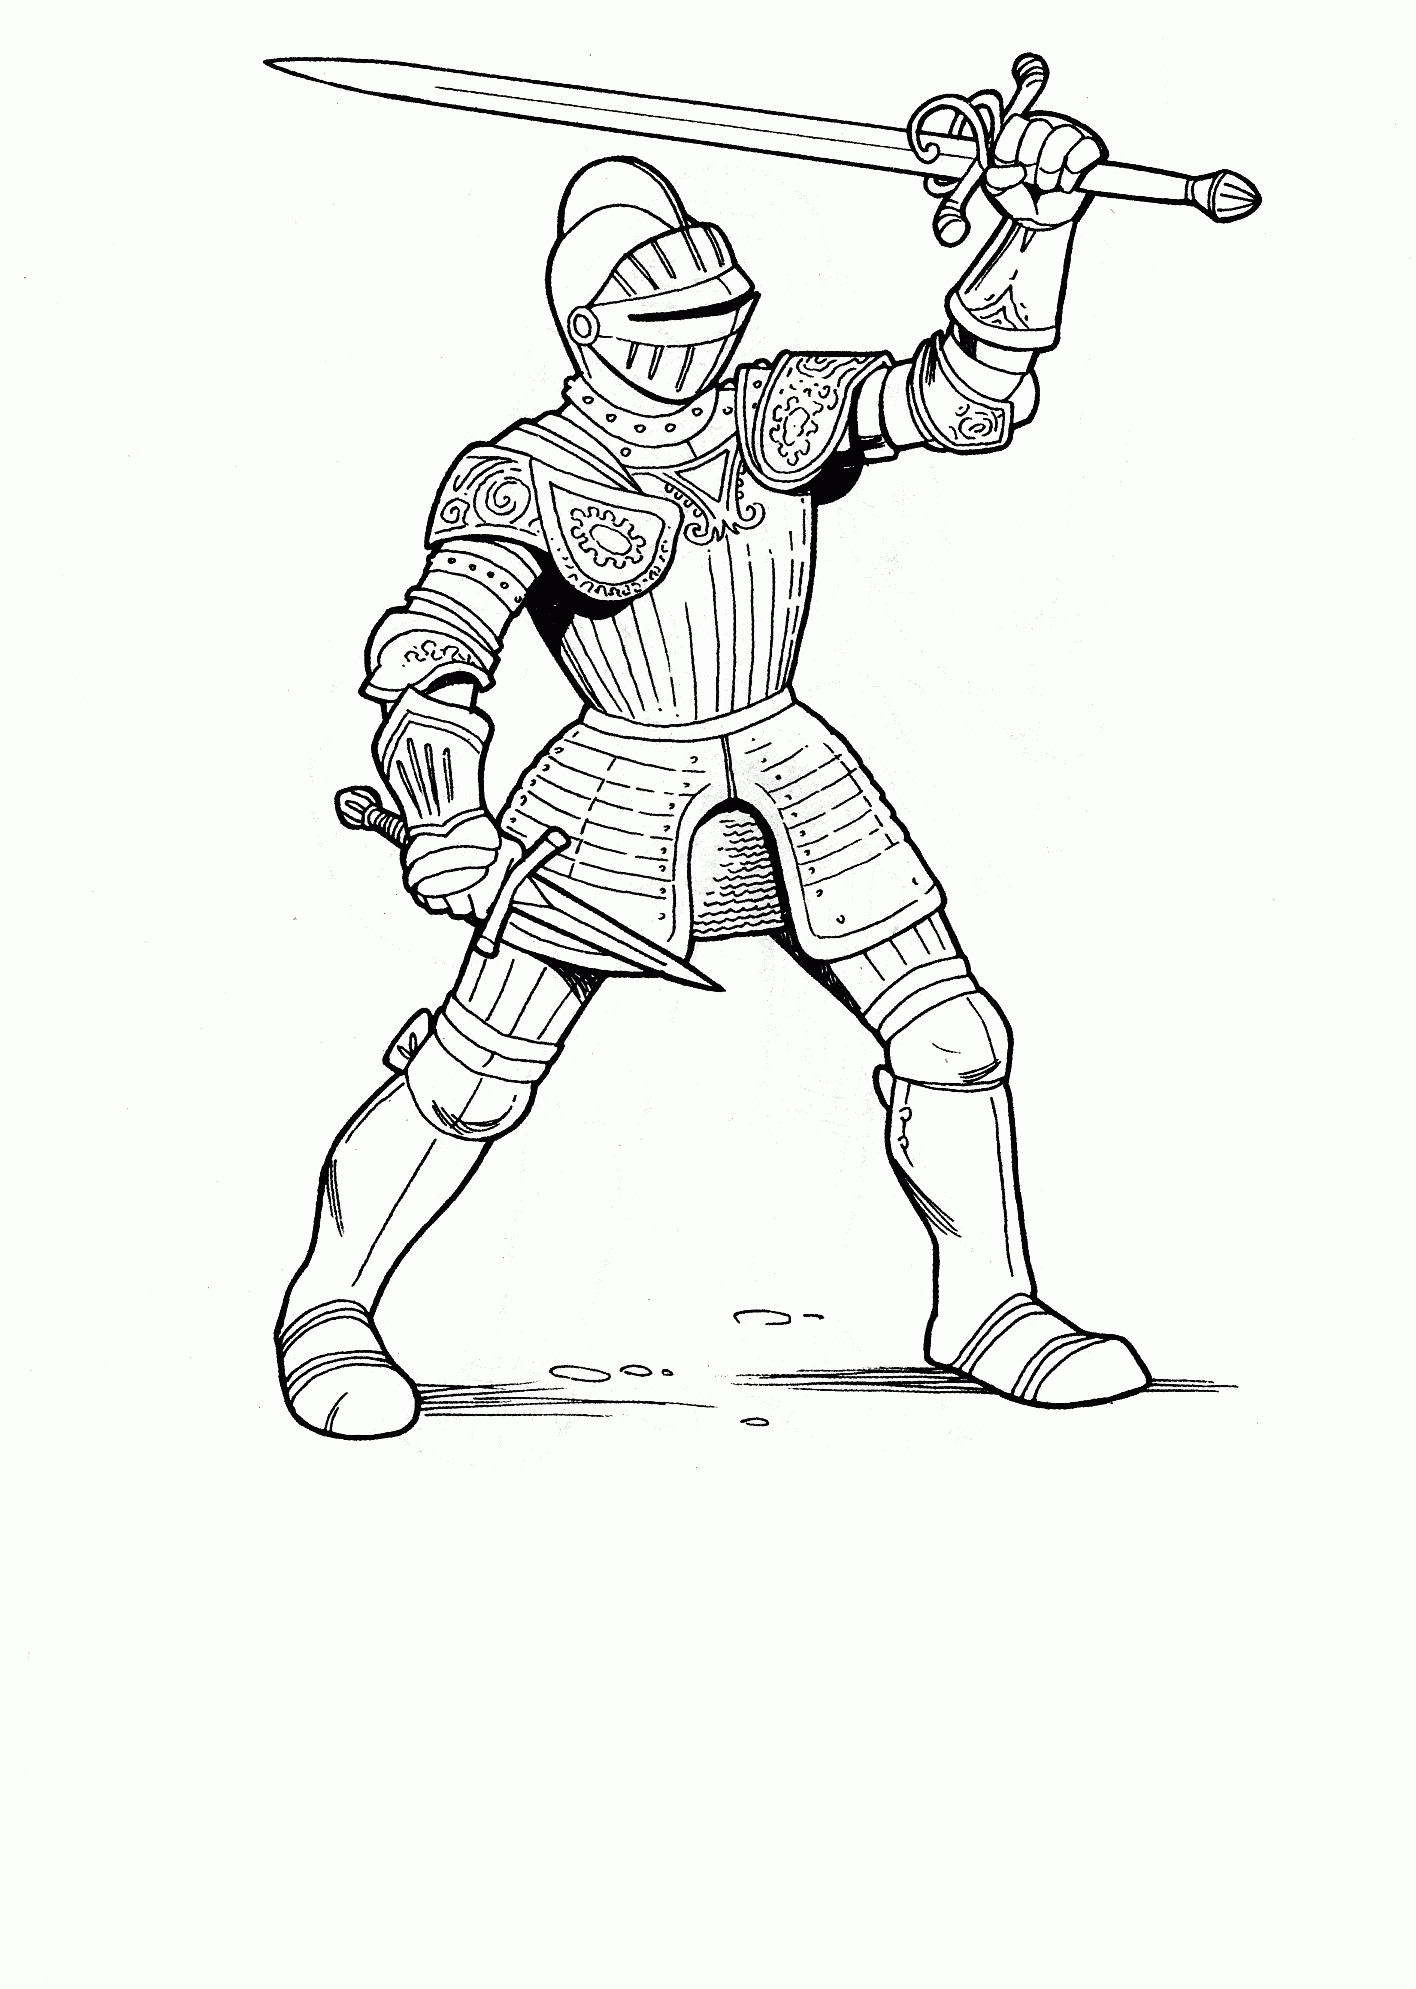 Knight Coloring Pages To Download And Print For Free - Coloring Home - Free Printable Pictures Of Knights